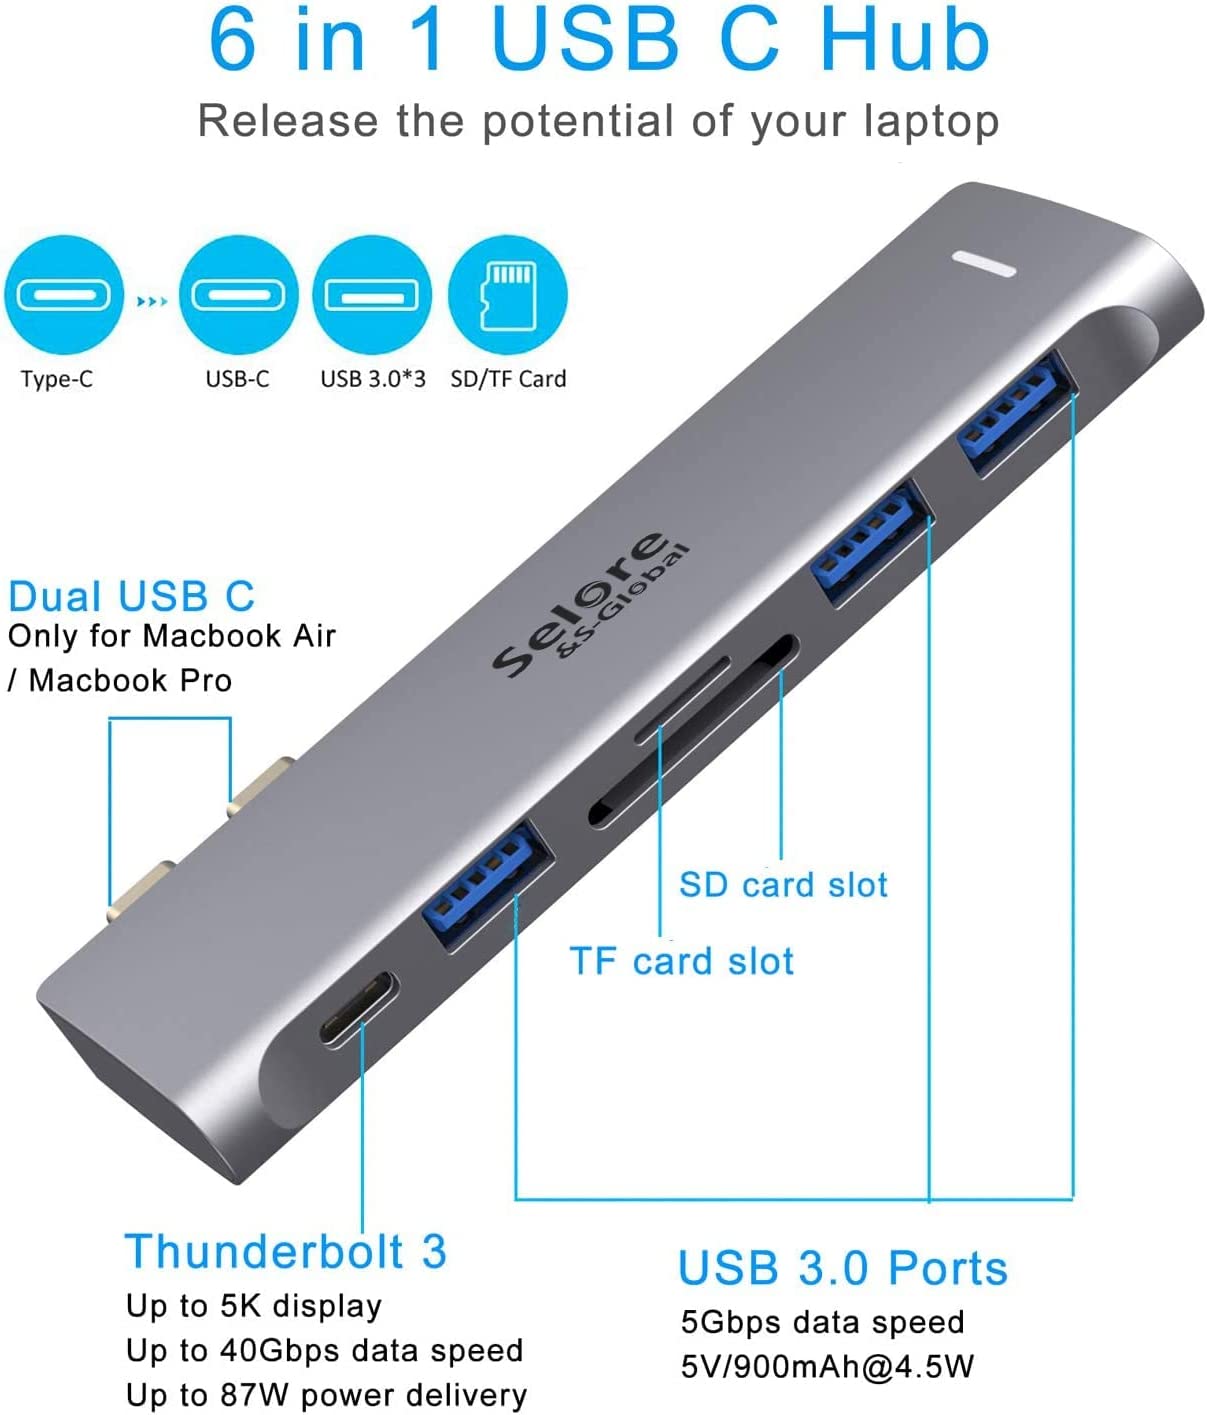 Connect to Anything - USB-C Hub - SD Card Reader 3.0 